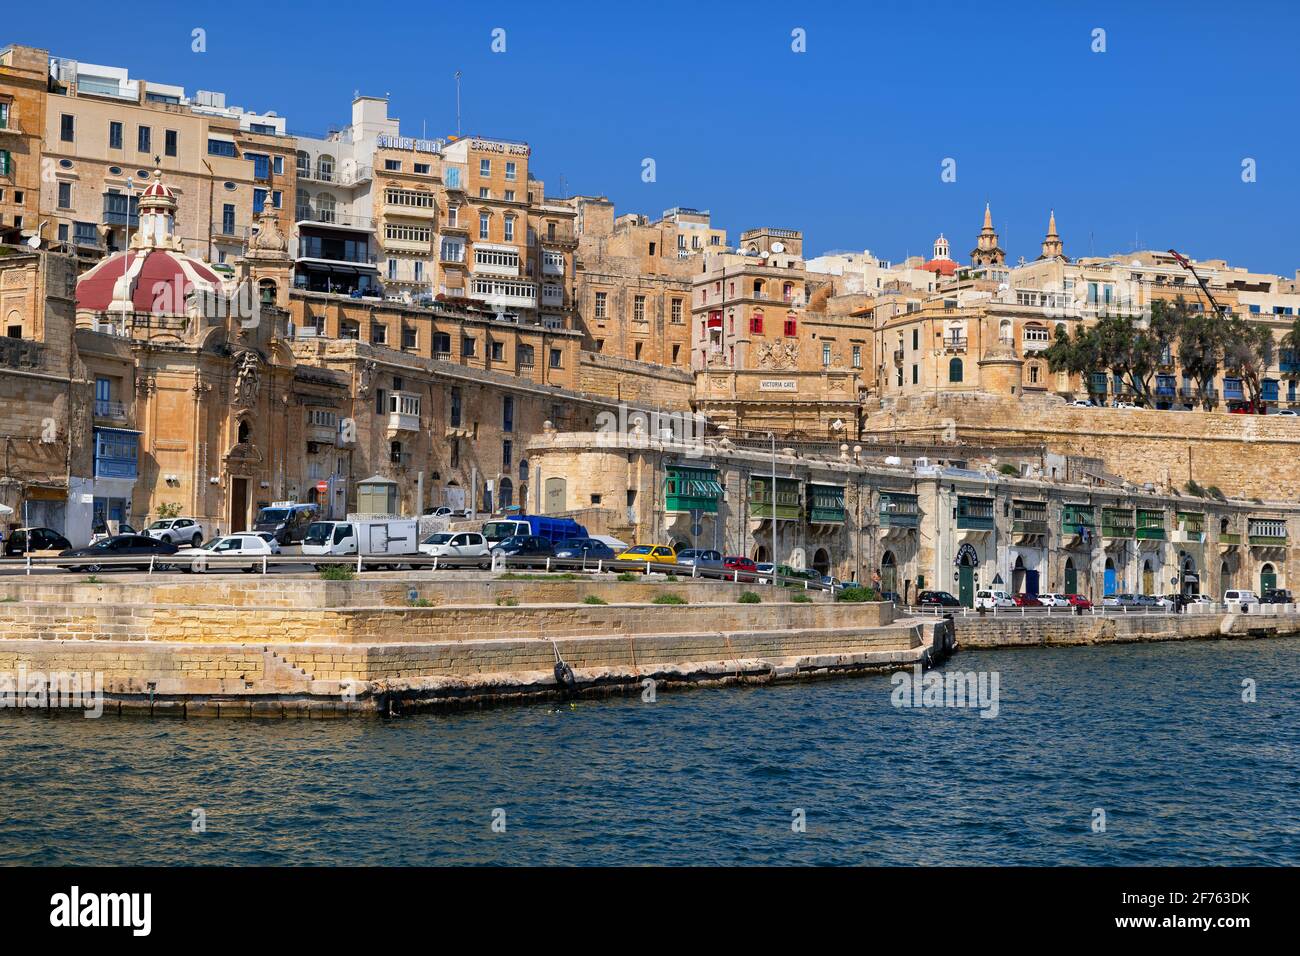 Valletta city skyline in Malta, view from the Grand Harbour Stock Photo